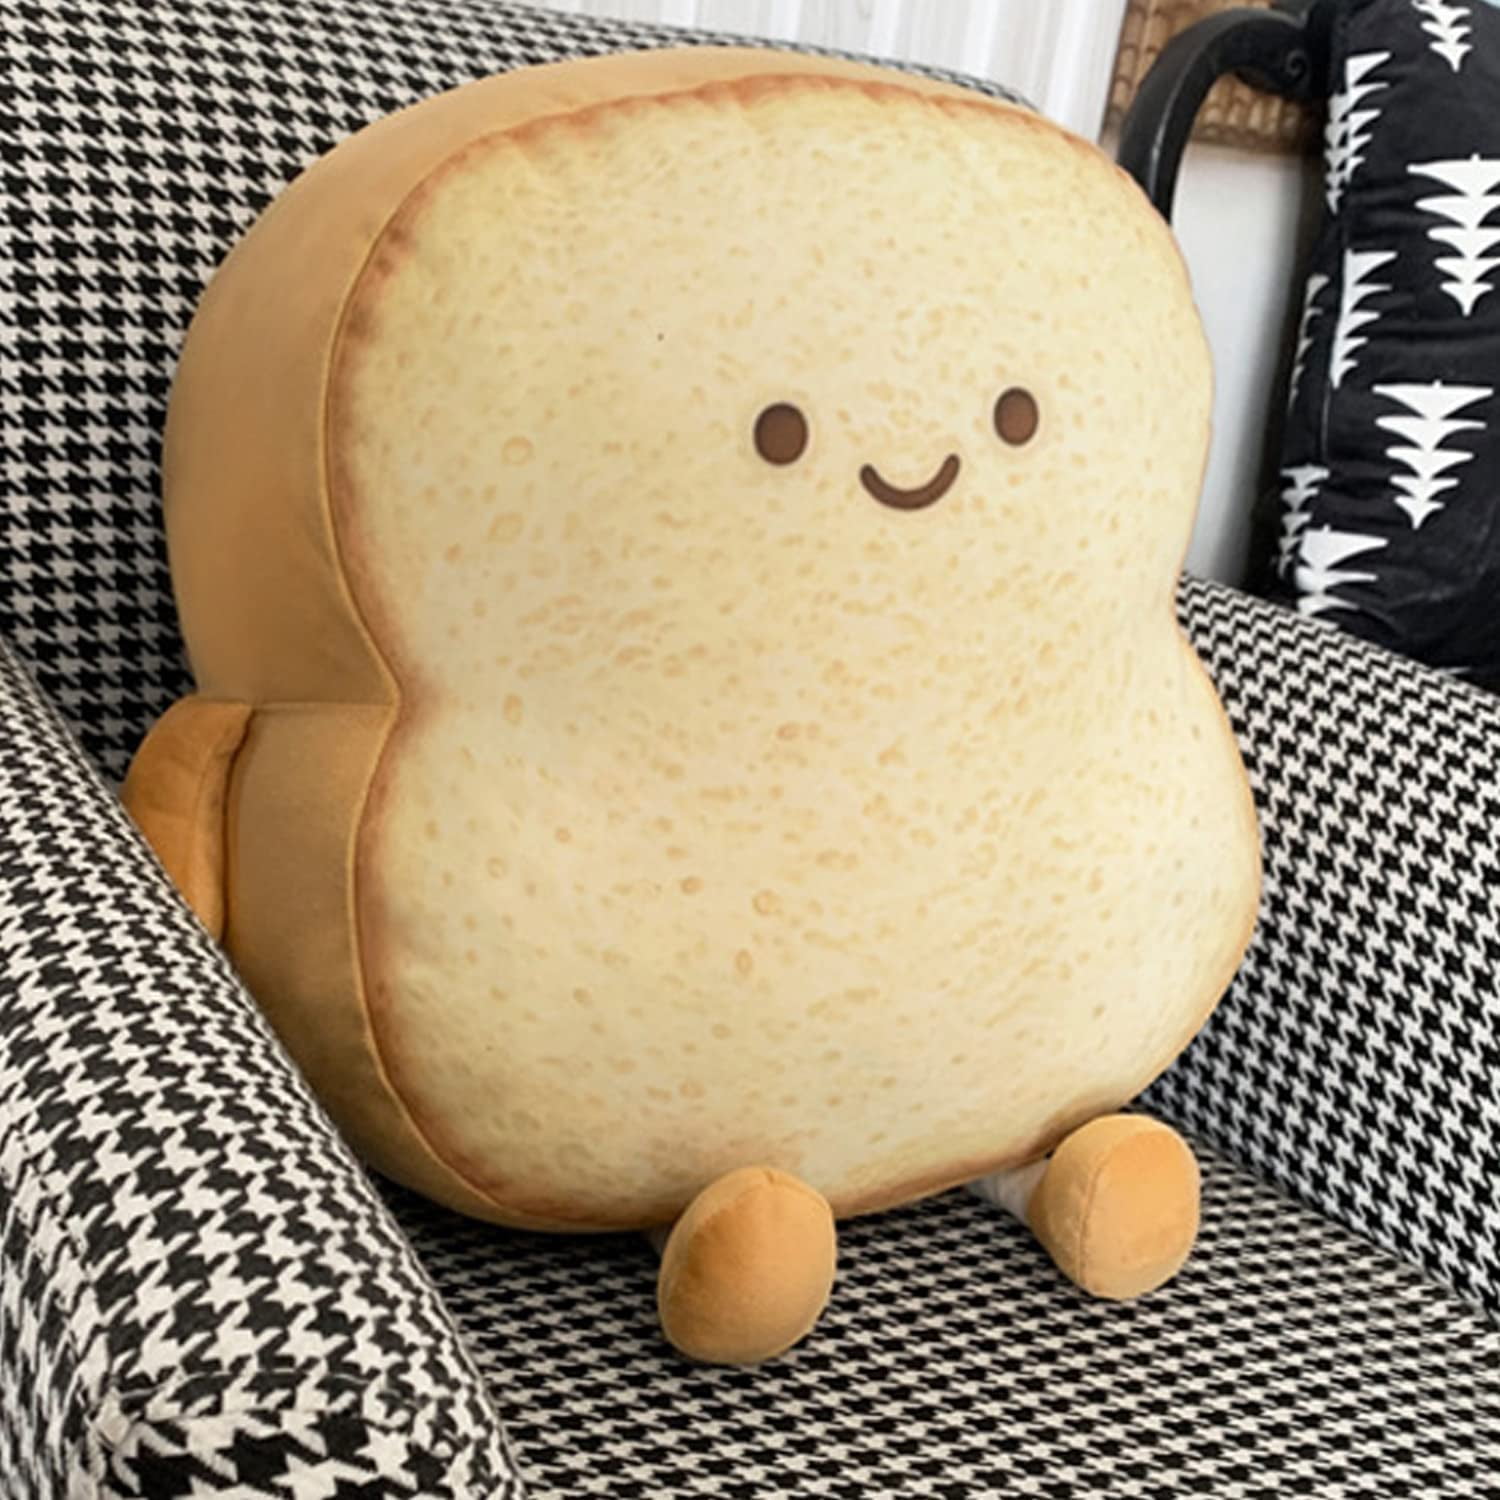 Wholesale 3D Simulation Bread Shape Pillow Soft Lumbar Baguette Back Cushion  Funny Food Plush Stuffed Toy From m.